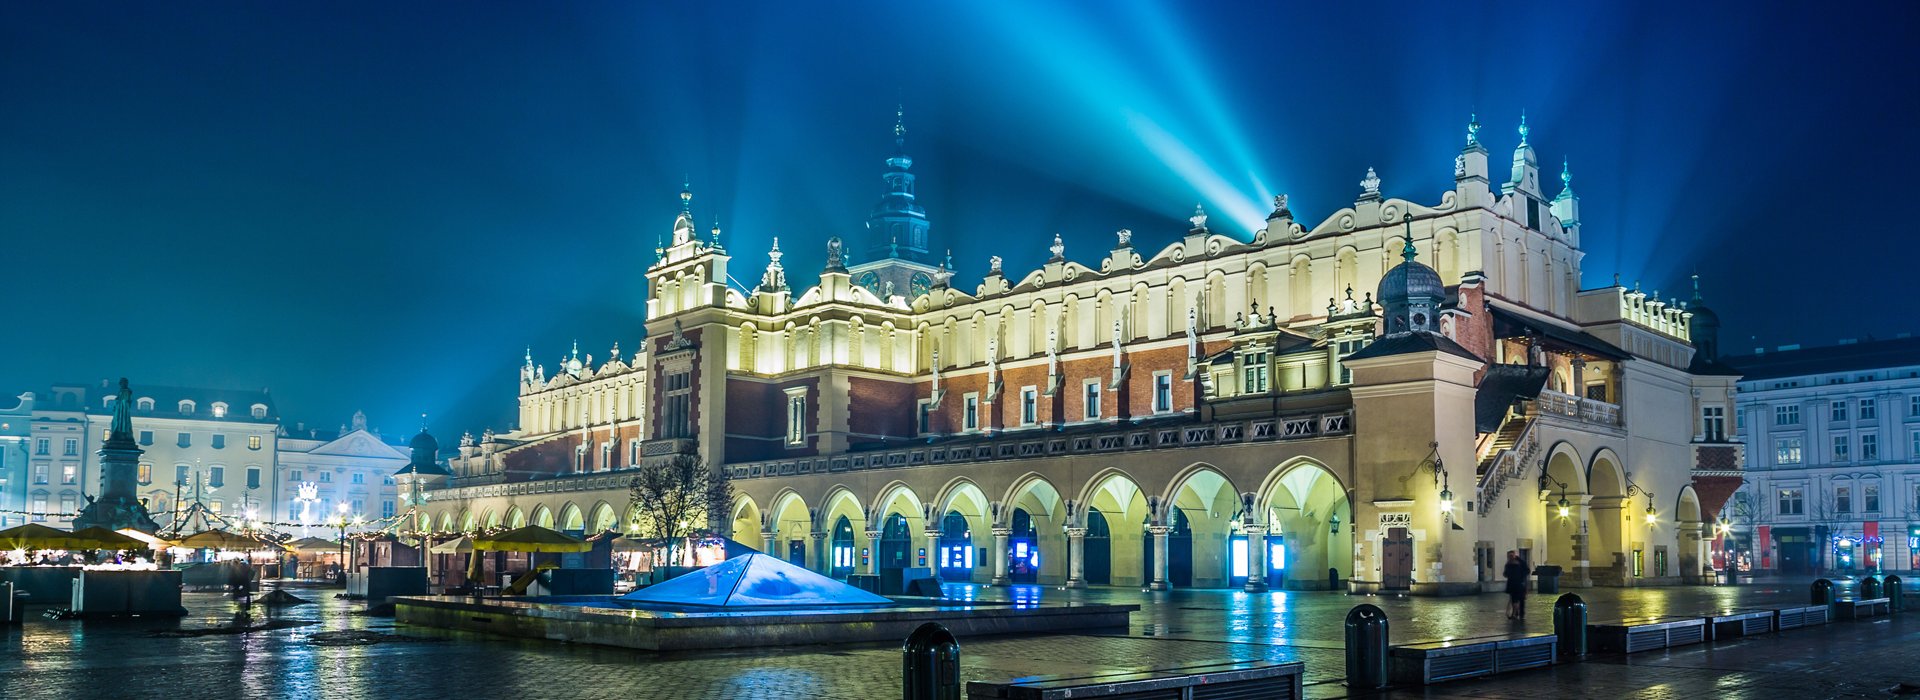 Splendid Cracow’s Old Cloth Hall in the evening lights